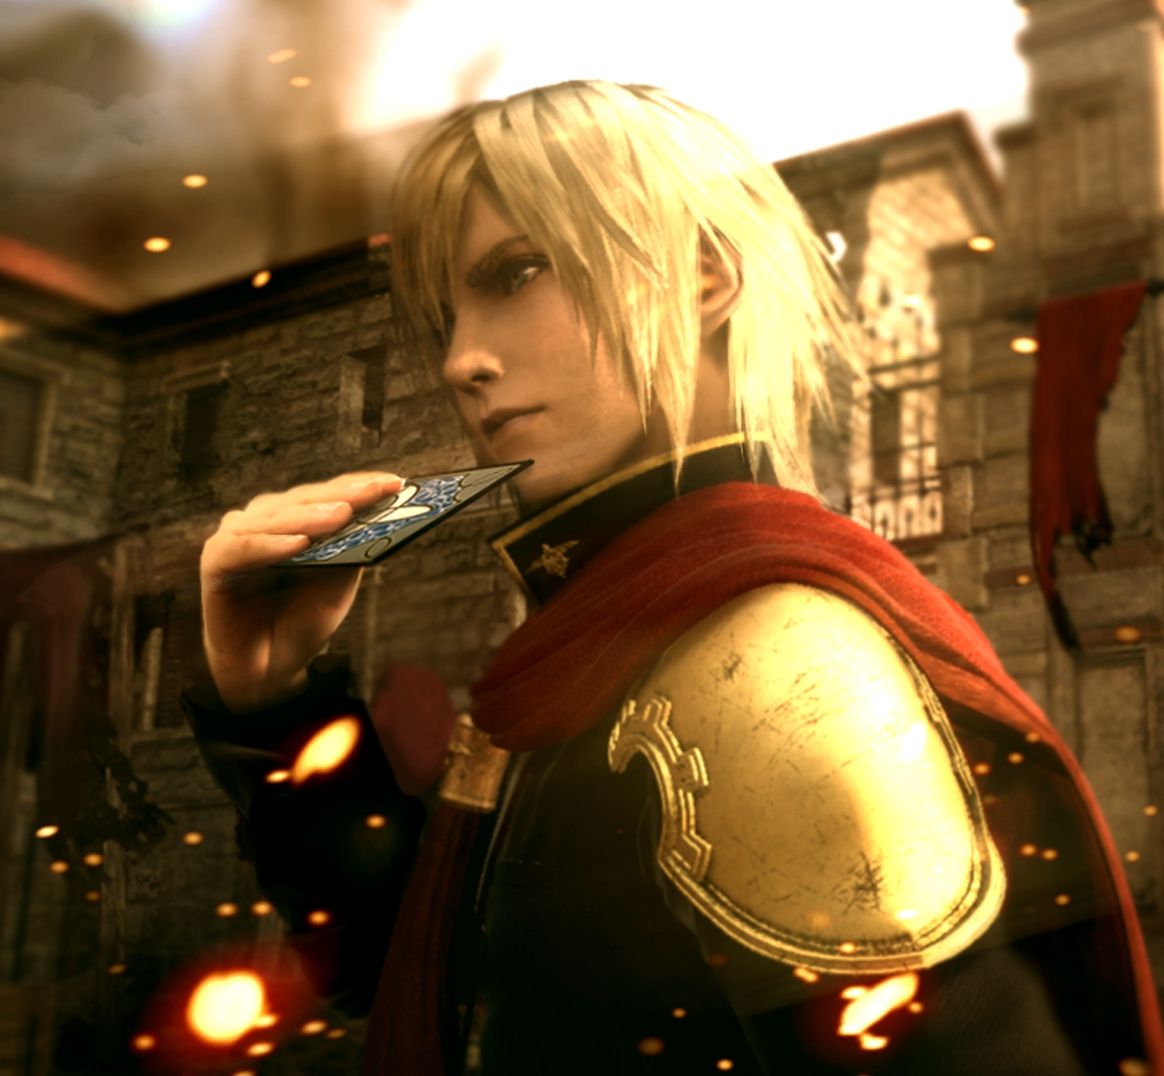 Image for Final Fantasy Type-0 HD heading west for PS4 and Xbox One